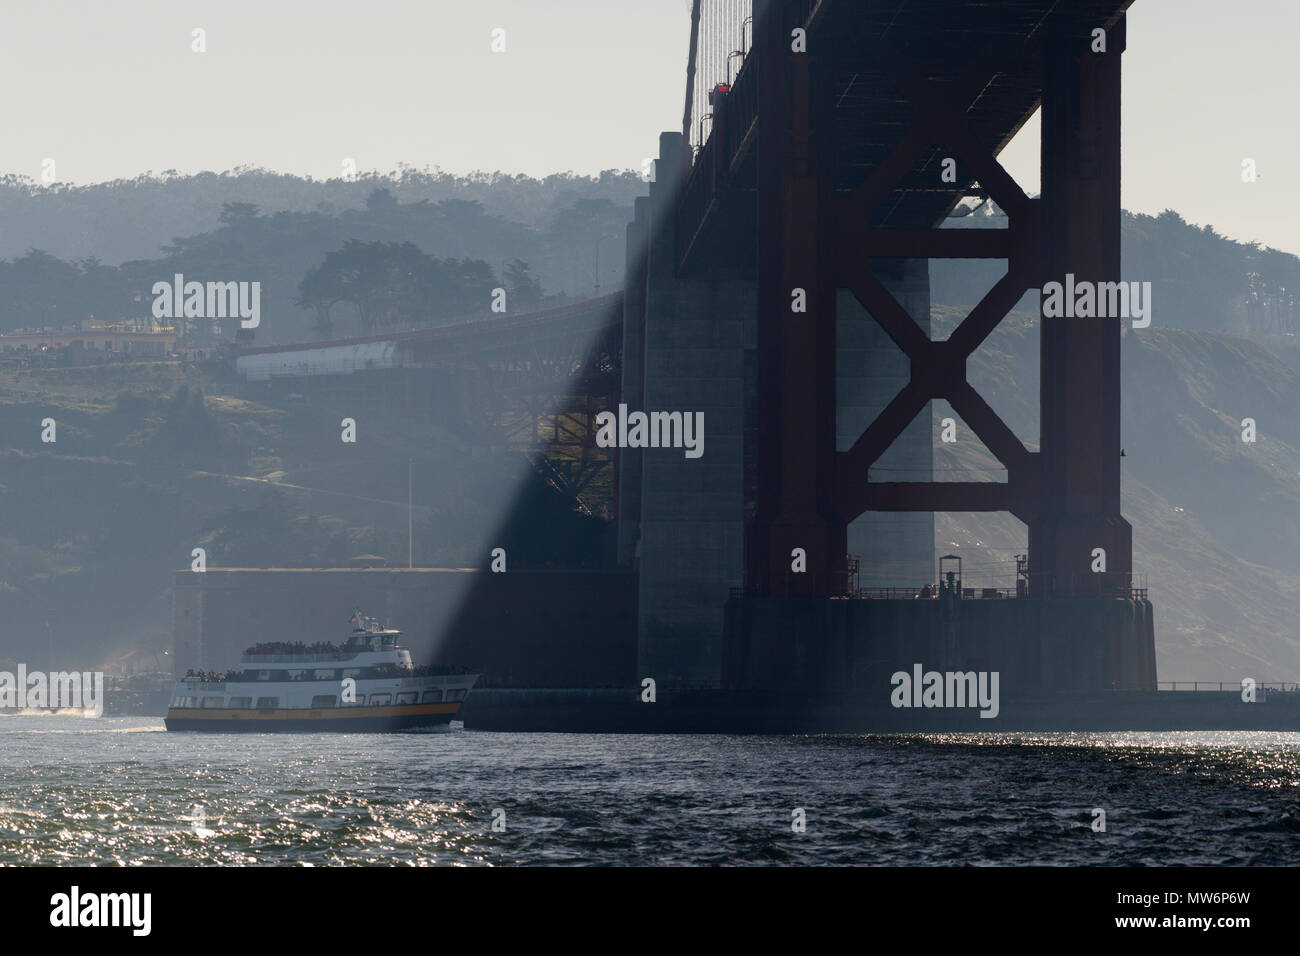 Public water ferry travels under the Golden Gate Bridge as seen from water level Stock Photo